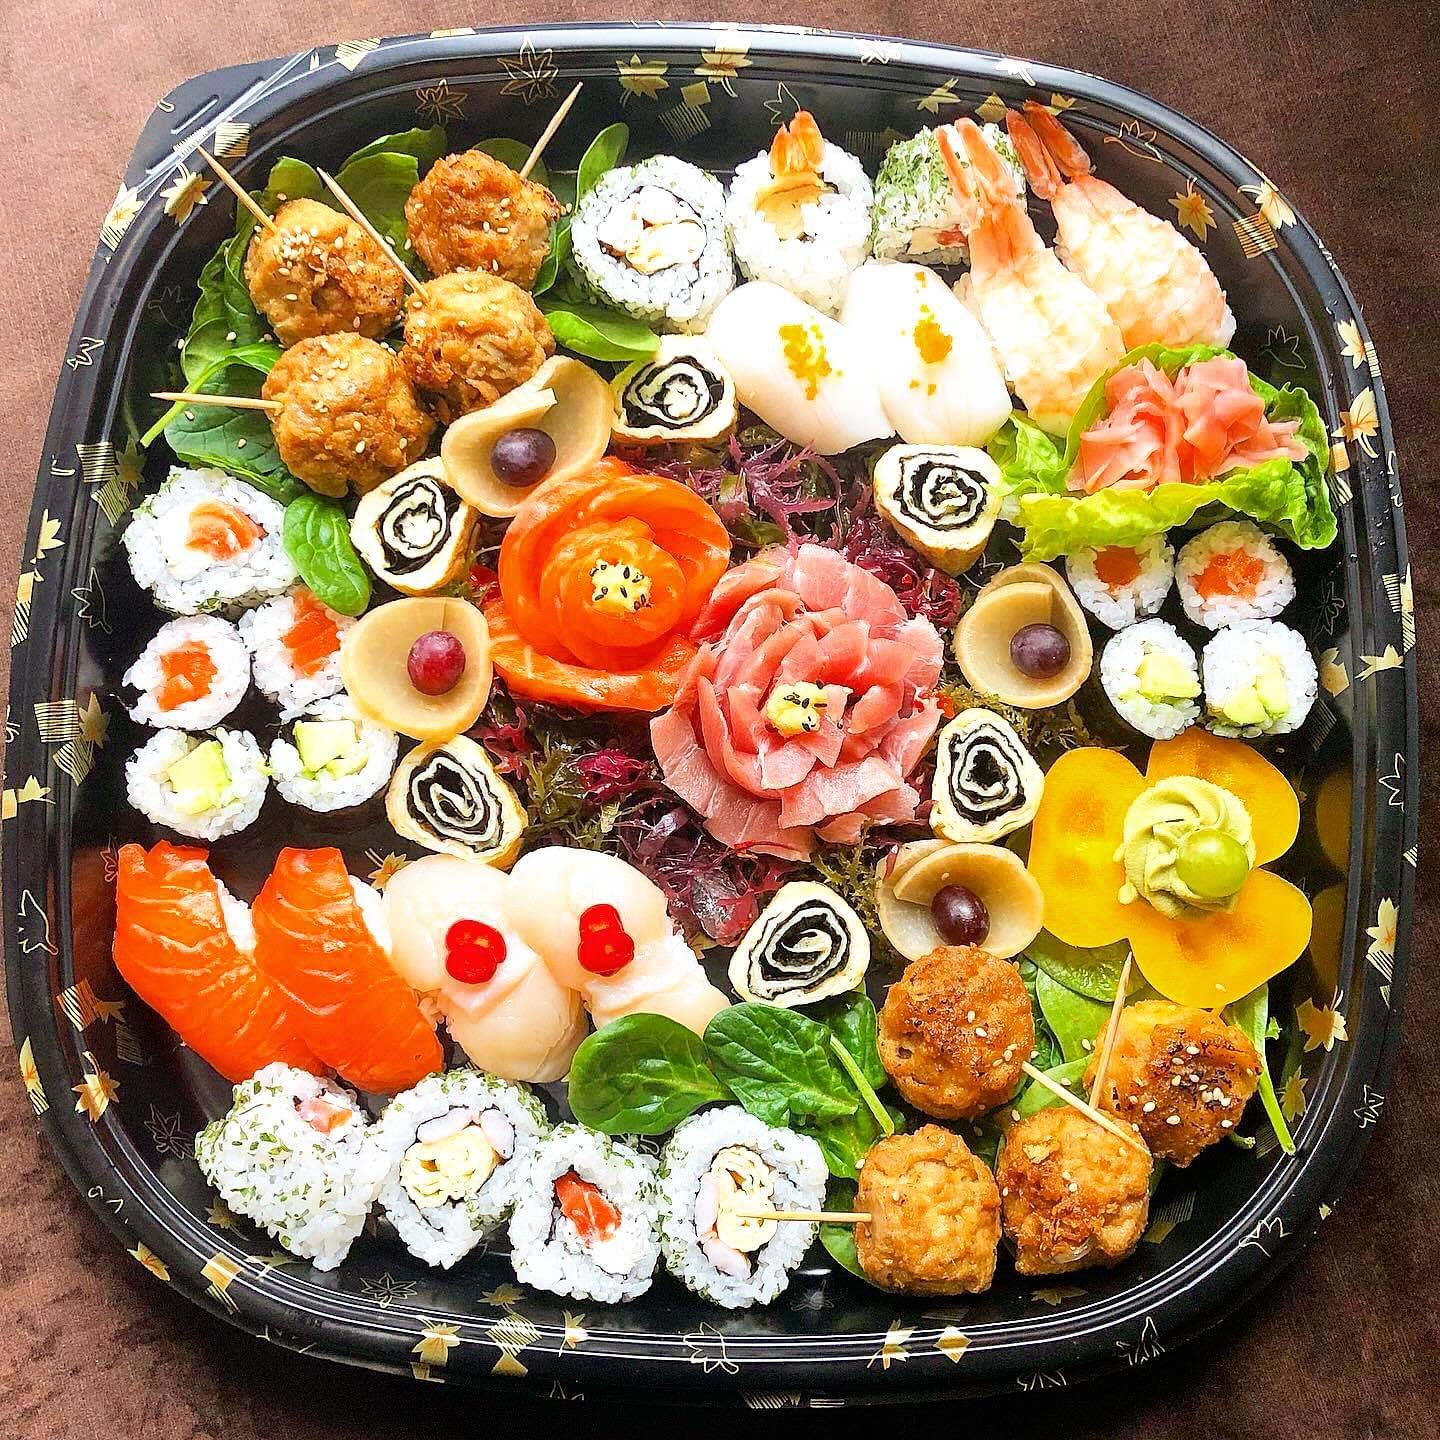 We offer Japanese catering for parties and office catering, when you book this service we will work closely with you to create your ideal menu with items from n&eacute;cco&rsquo; s menu or if you&rsquo;re looking for something extra special, our chef